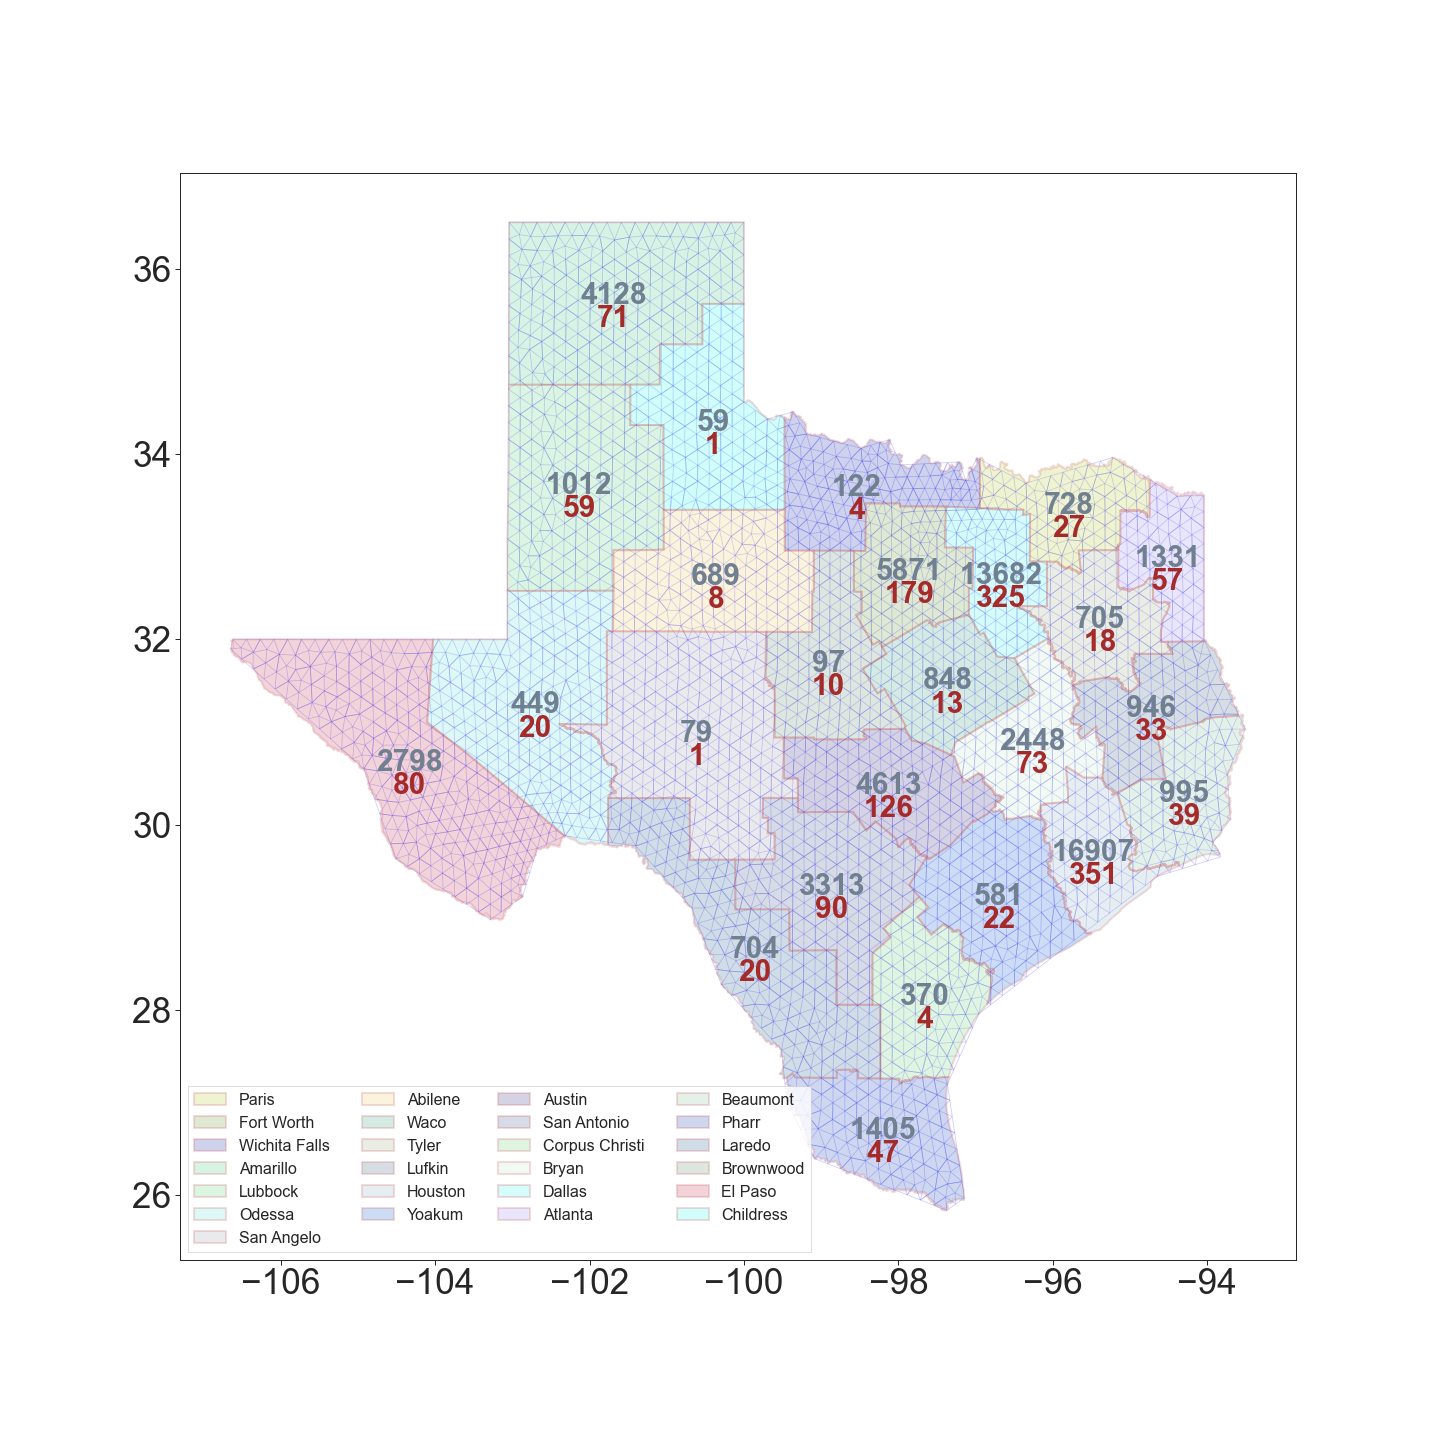 Number of infected and deceased cases in Texas districts on June 1, 2020